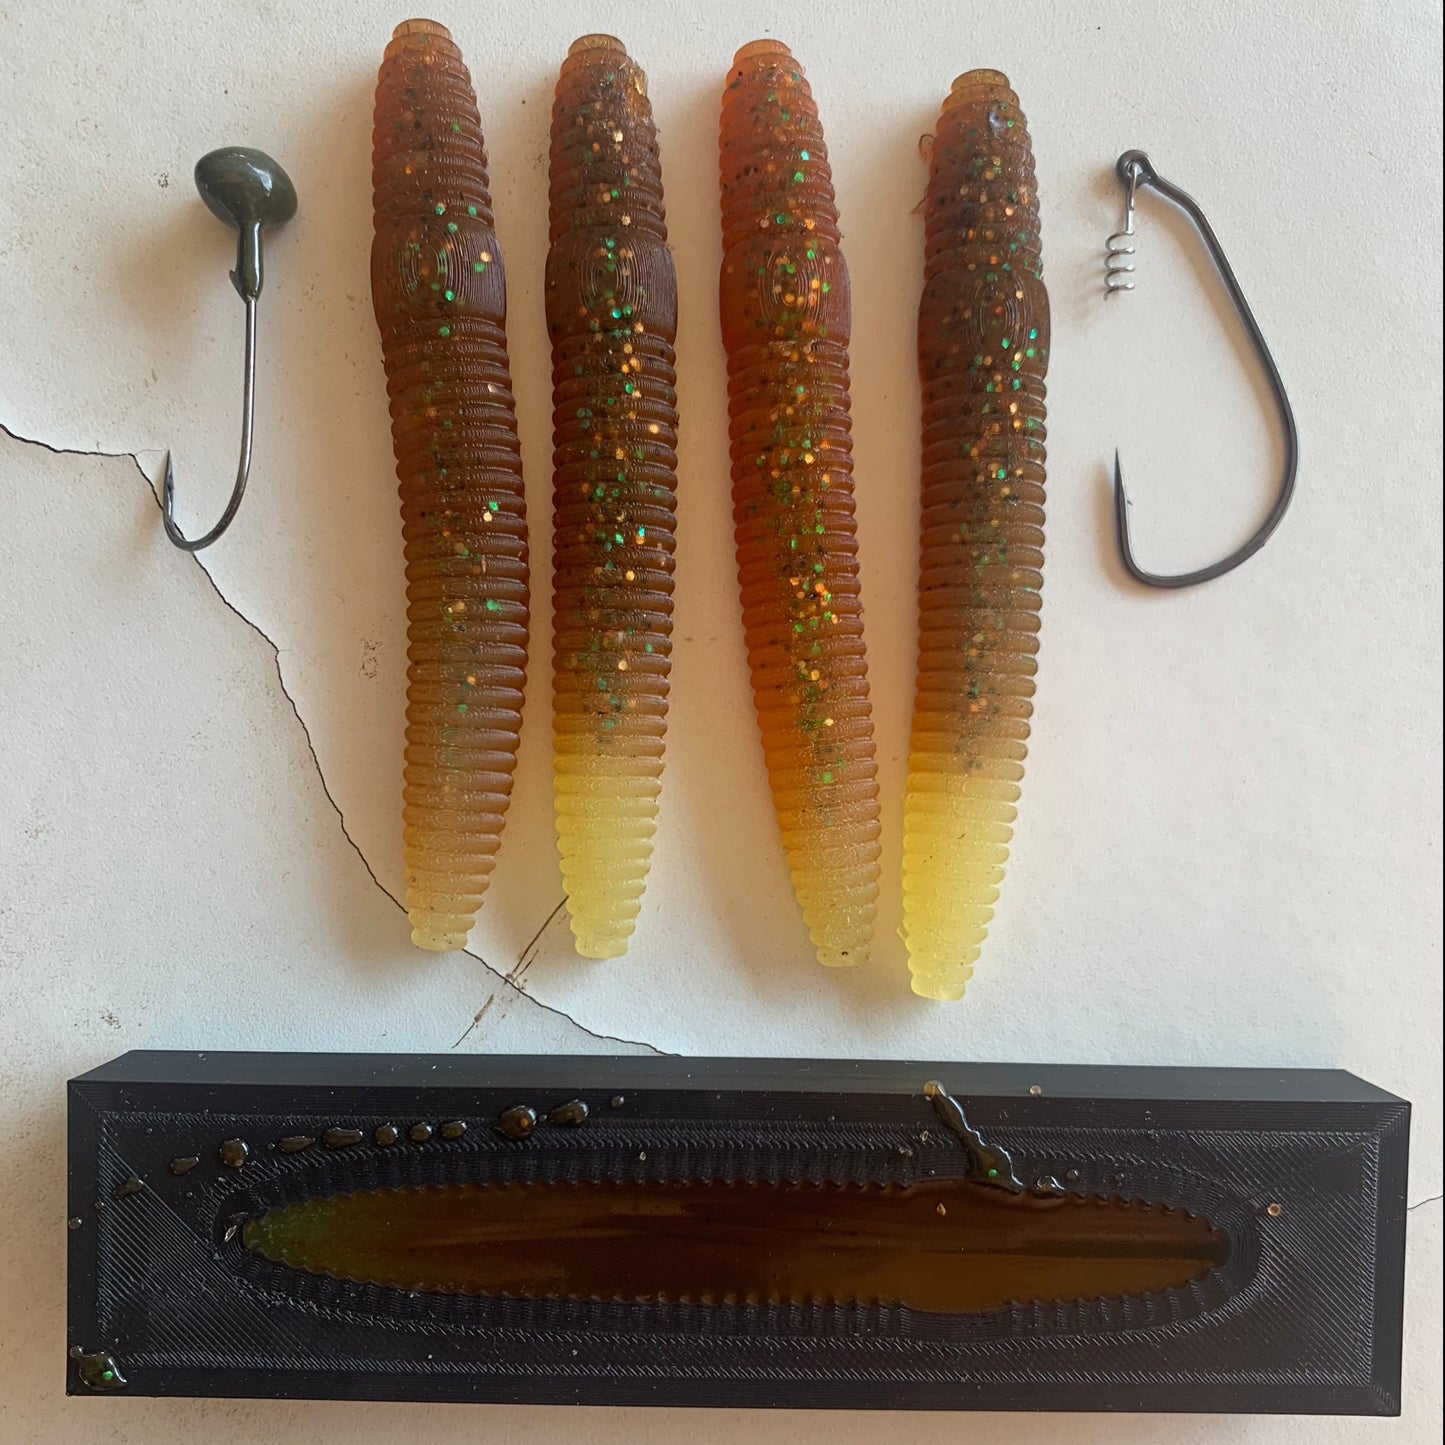 Make your own soft plastics baits with our soft plastic bait molds!